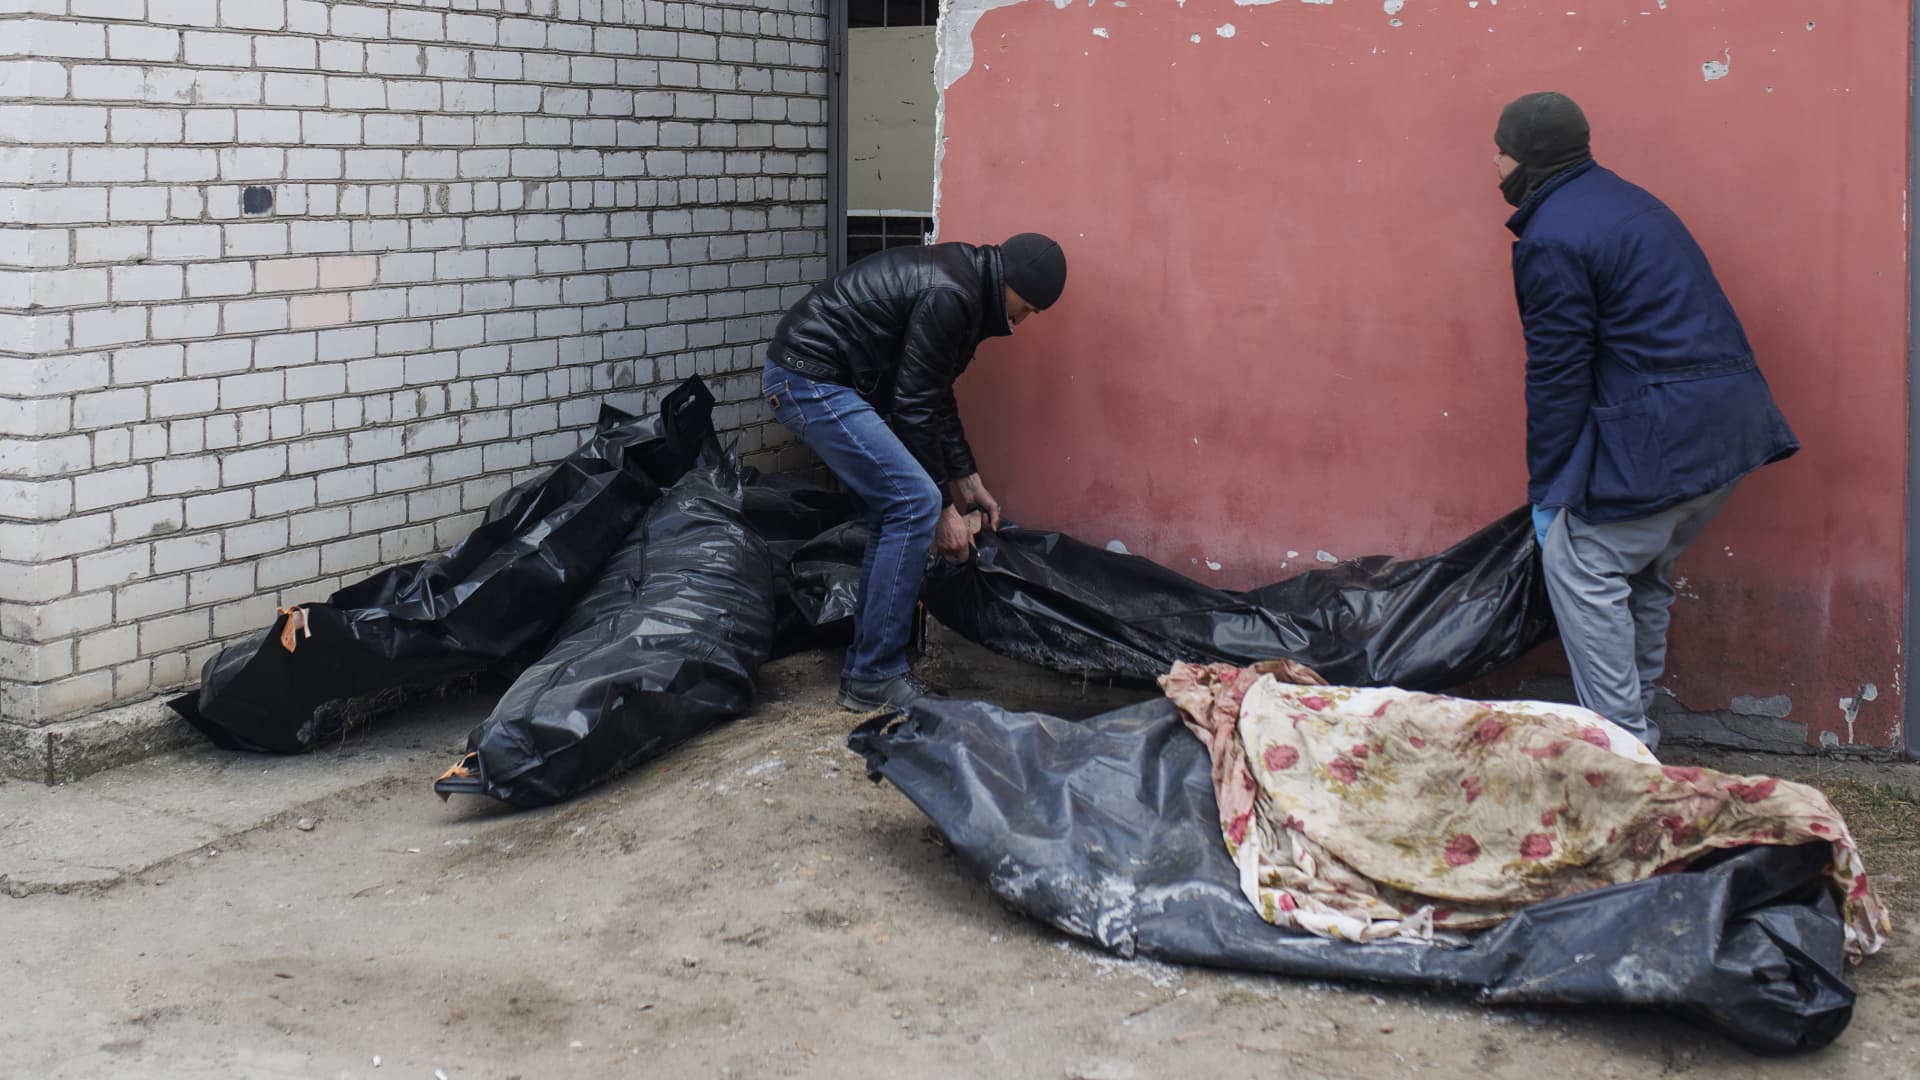 Workers transport a corpse of a Ukrainian soldier at the morgue in Mykolaiv, Ukraine on March 18, 2022.